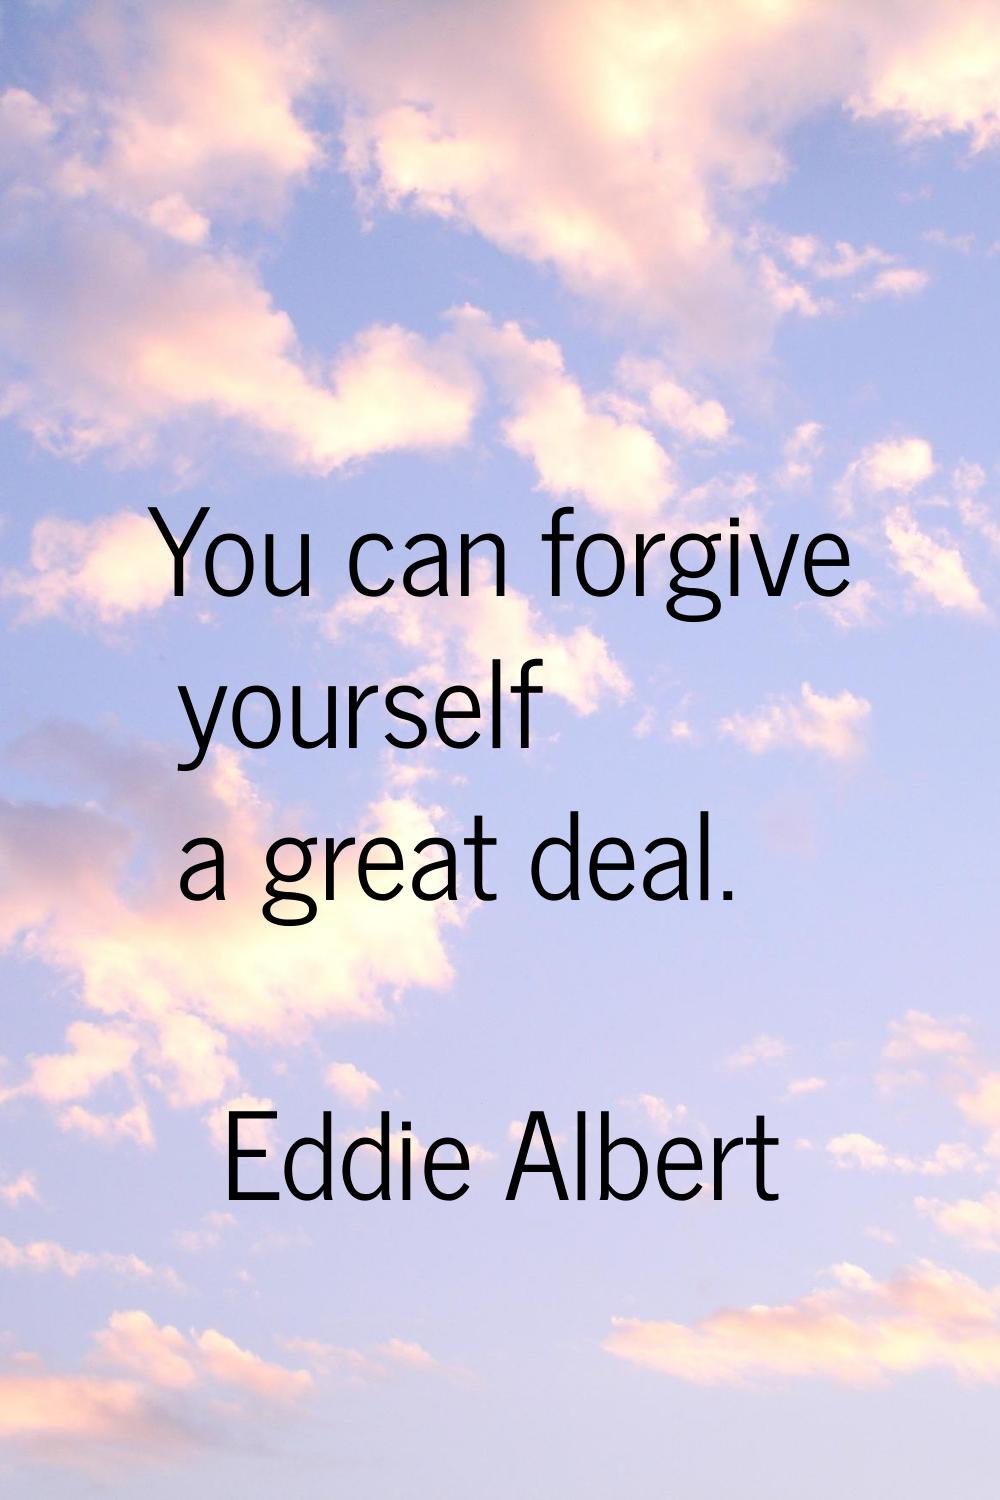 You can forgive yourself a great deal.